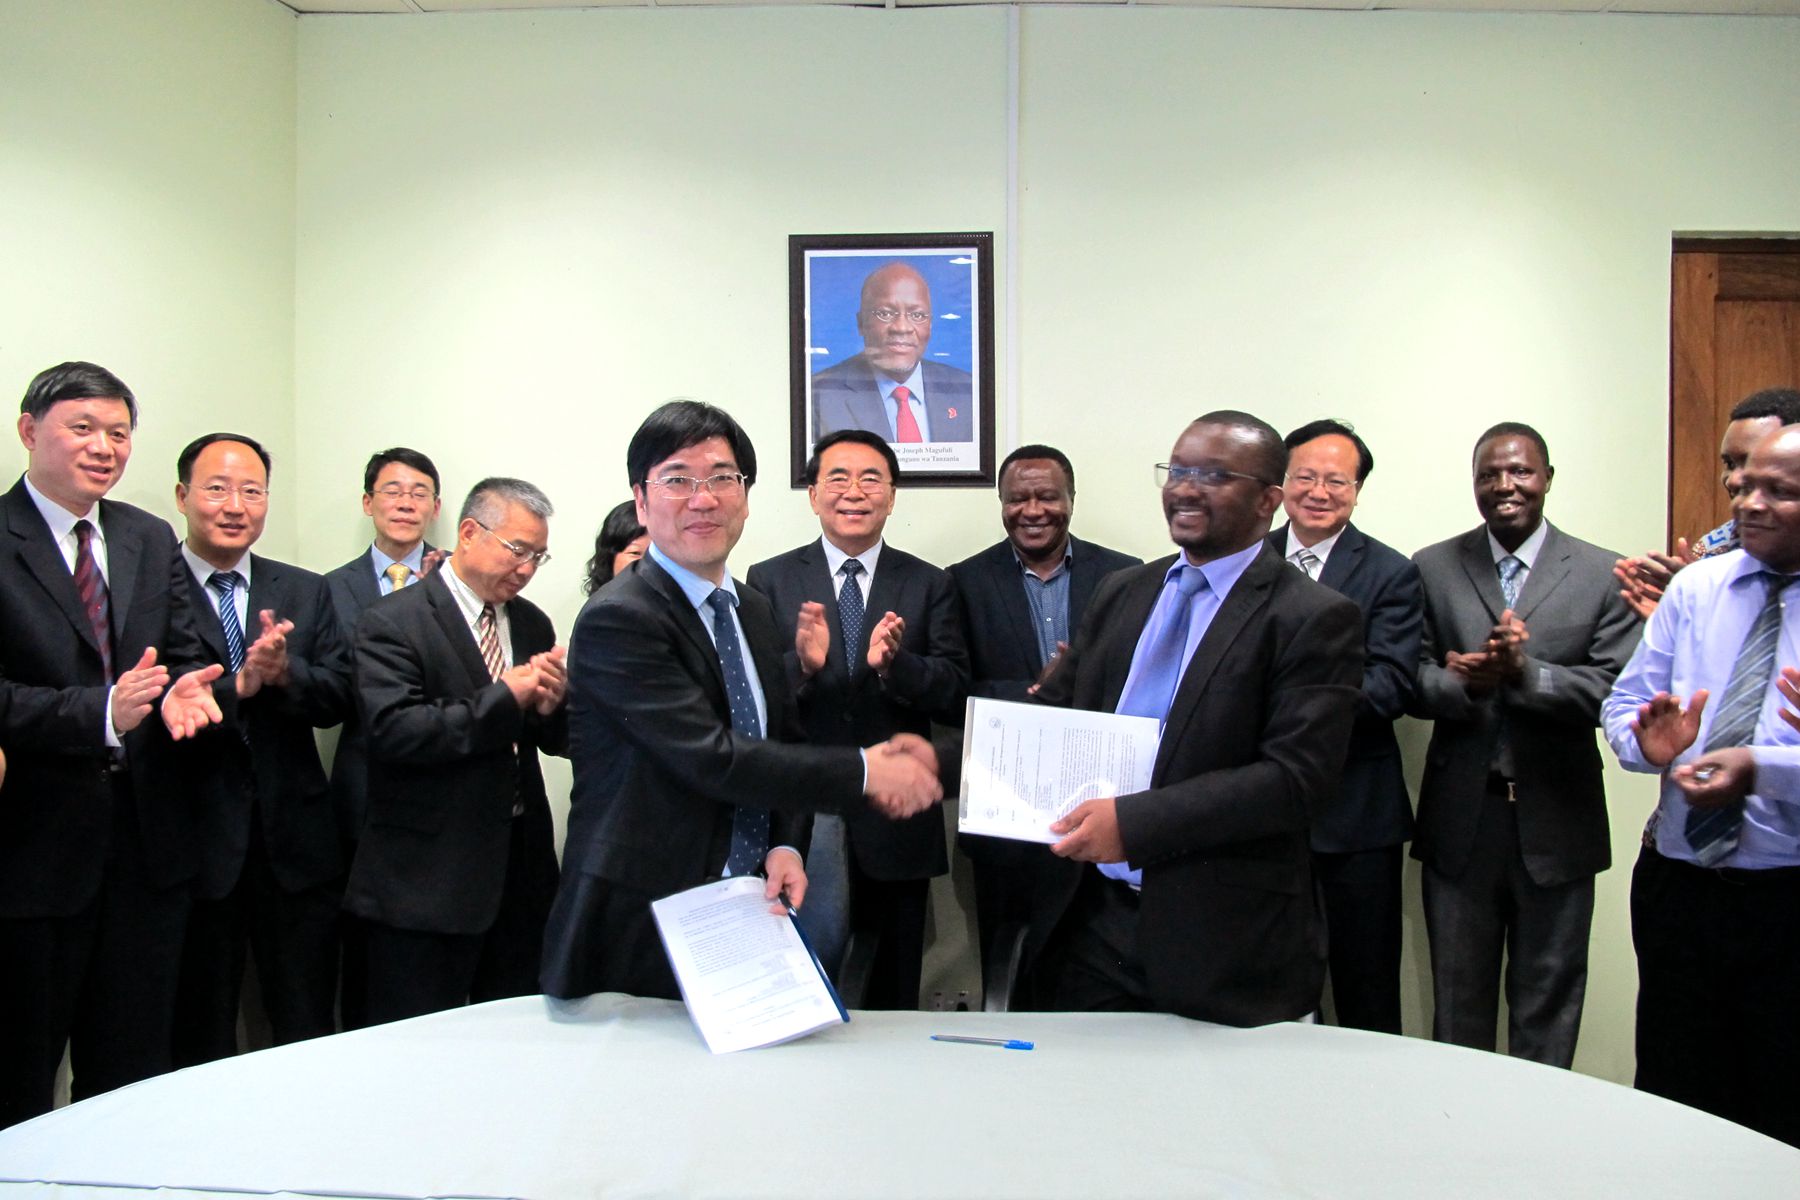 Nanjing Institute of Geography and Limnology signs a MoU with Tanzania Fisheries Research Institute. Photo by Jiang Yiqi.jpg